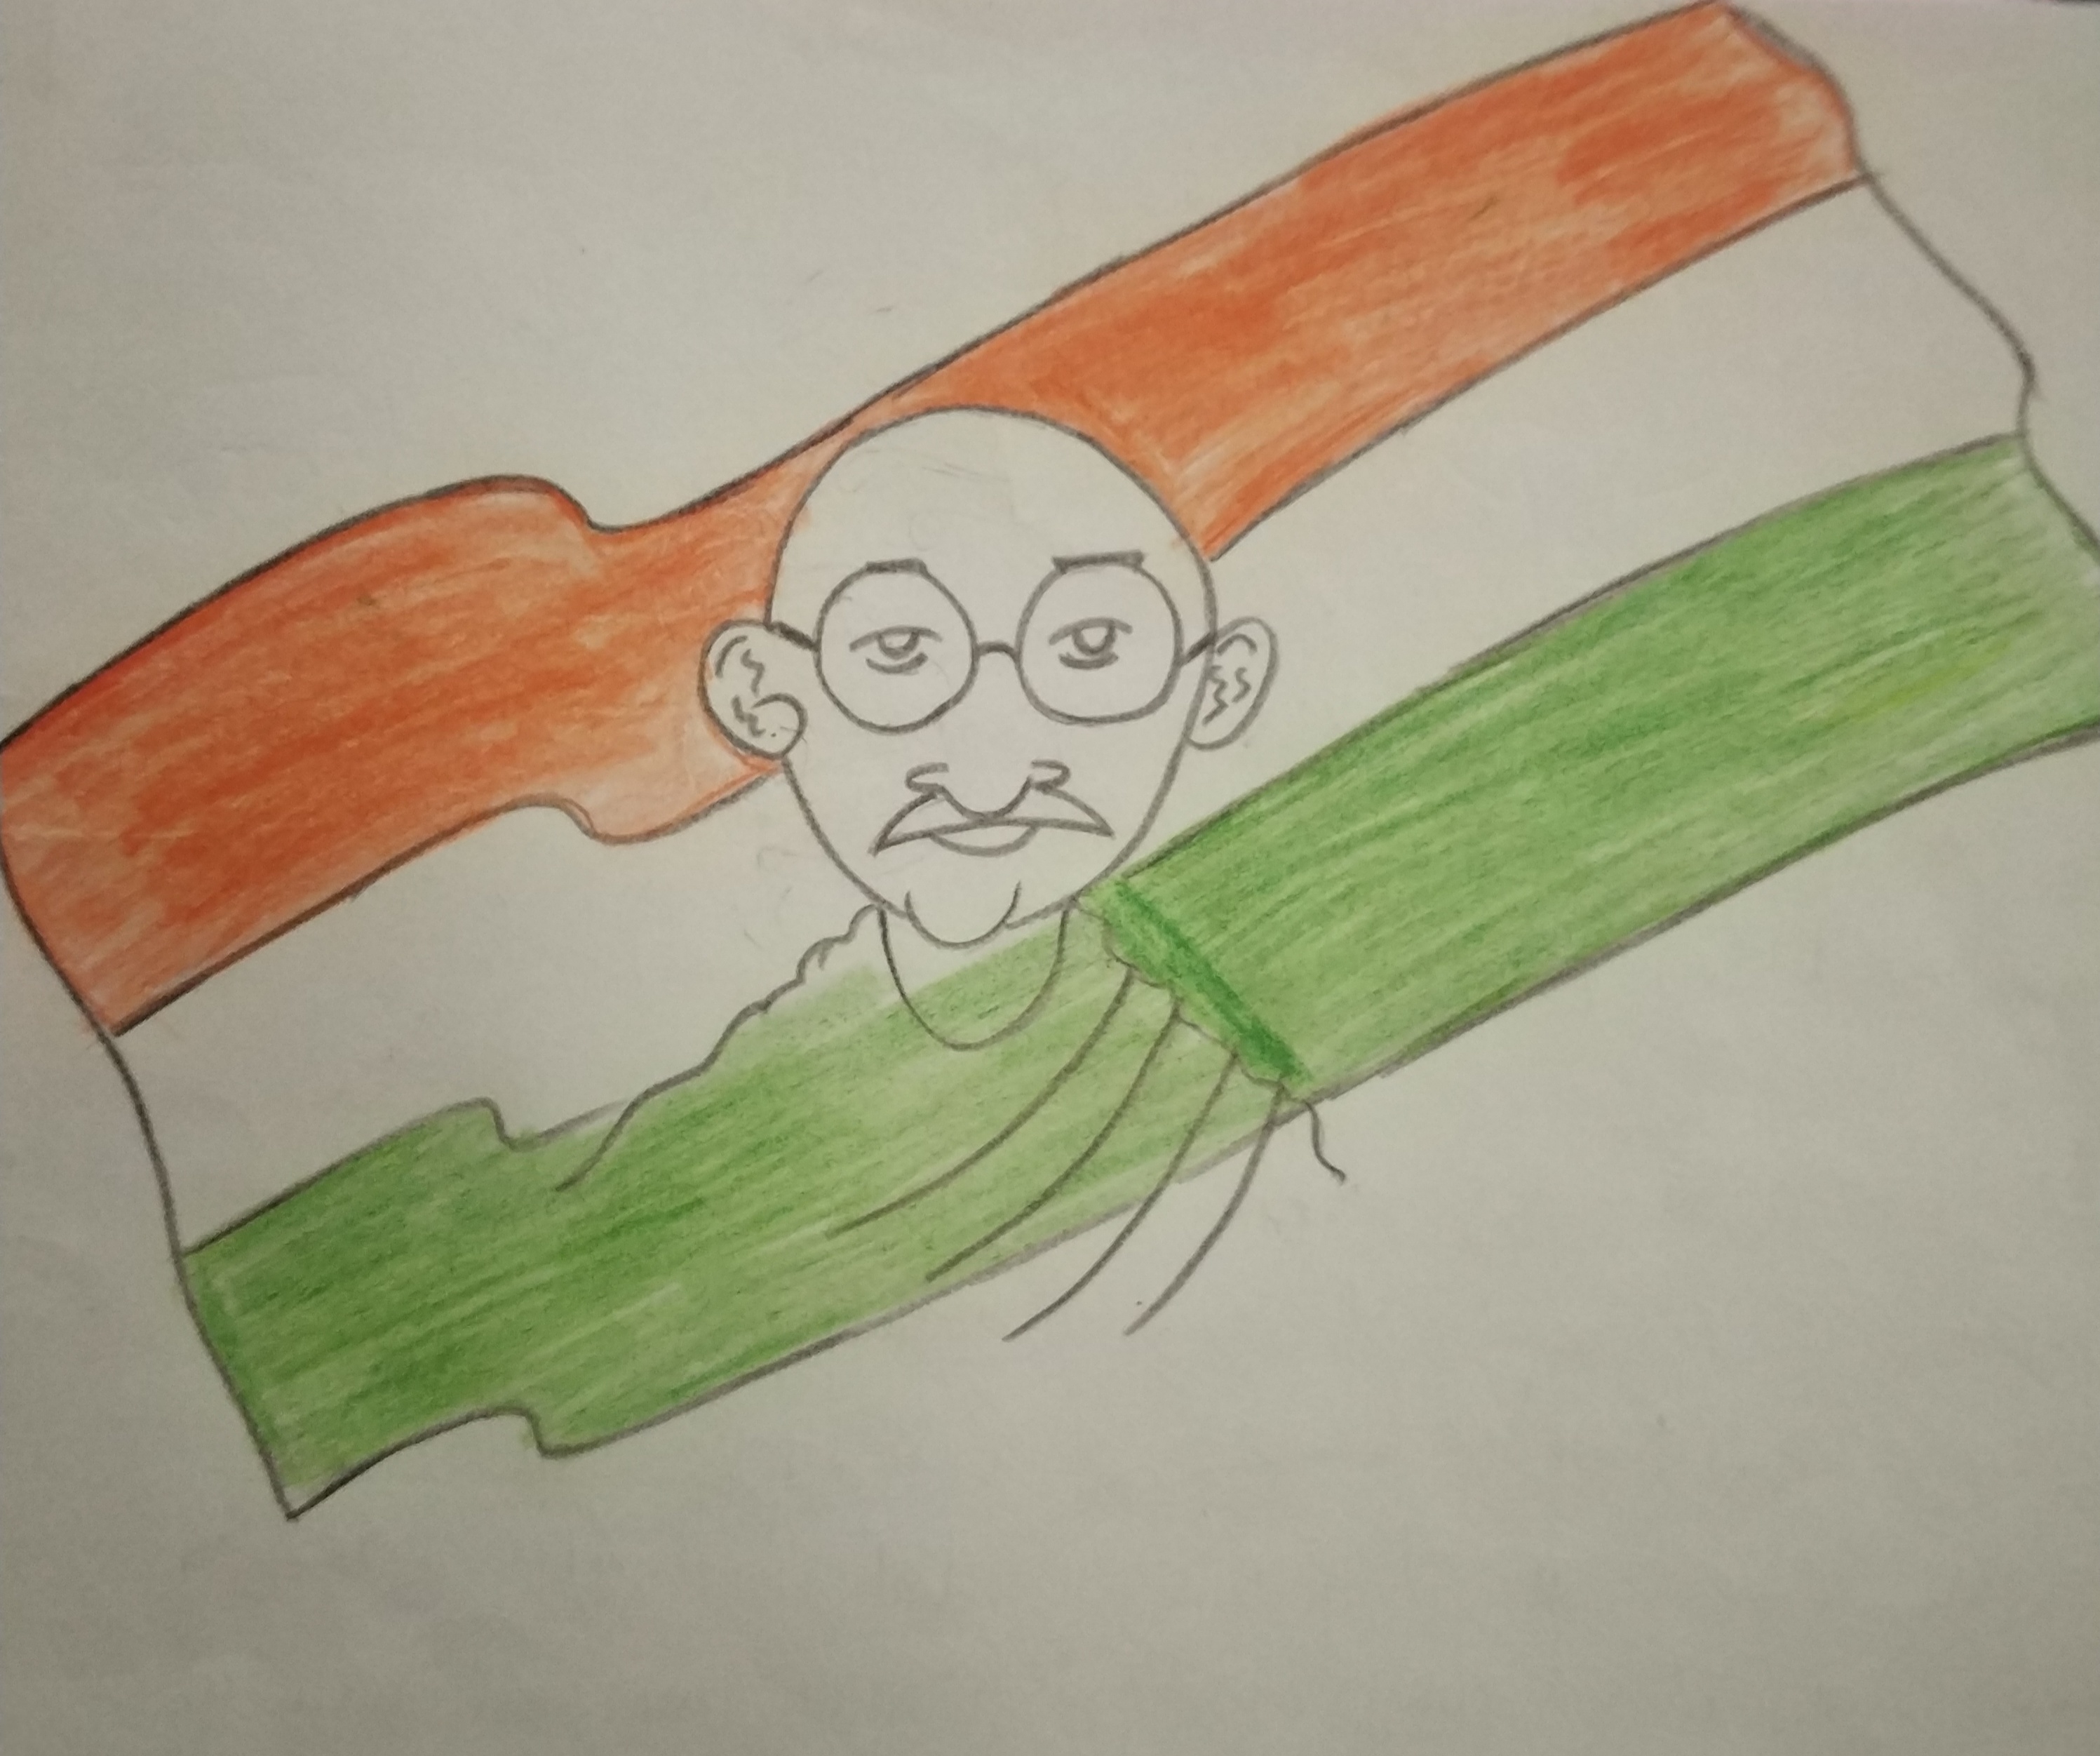 Independence day drawing pictures||gandhiji painting ||15th August - YouTube